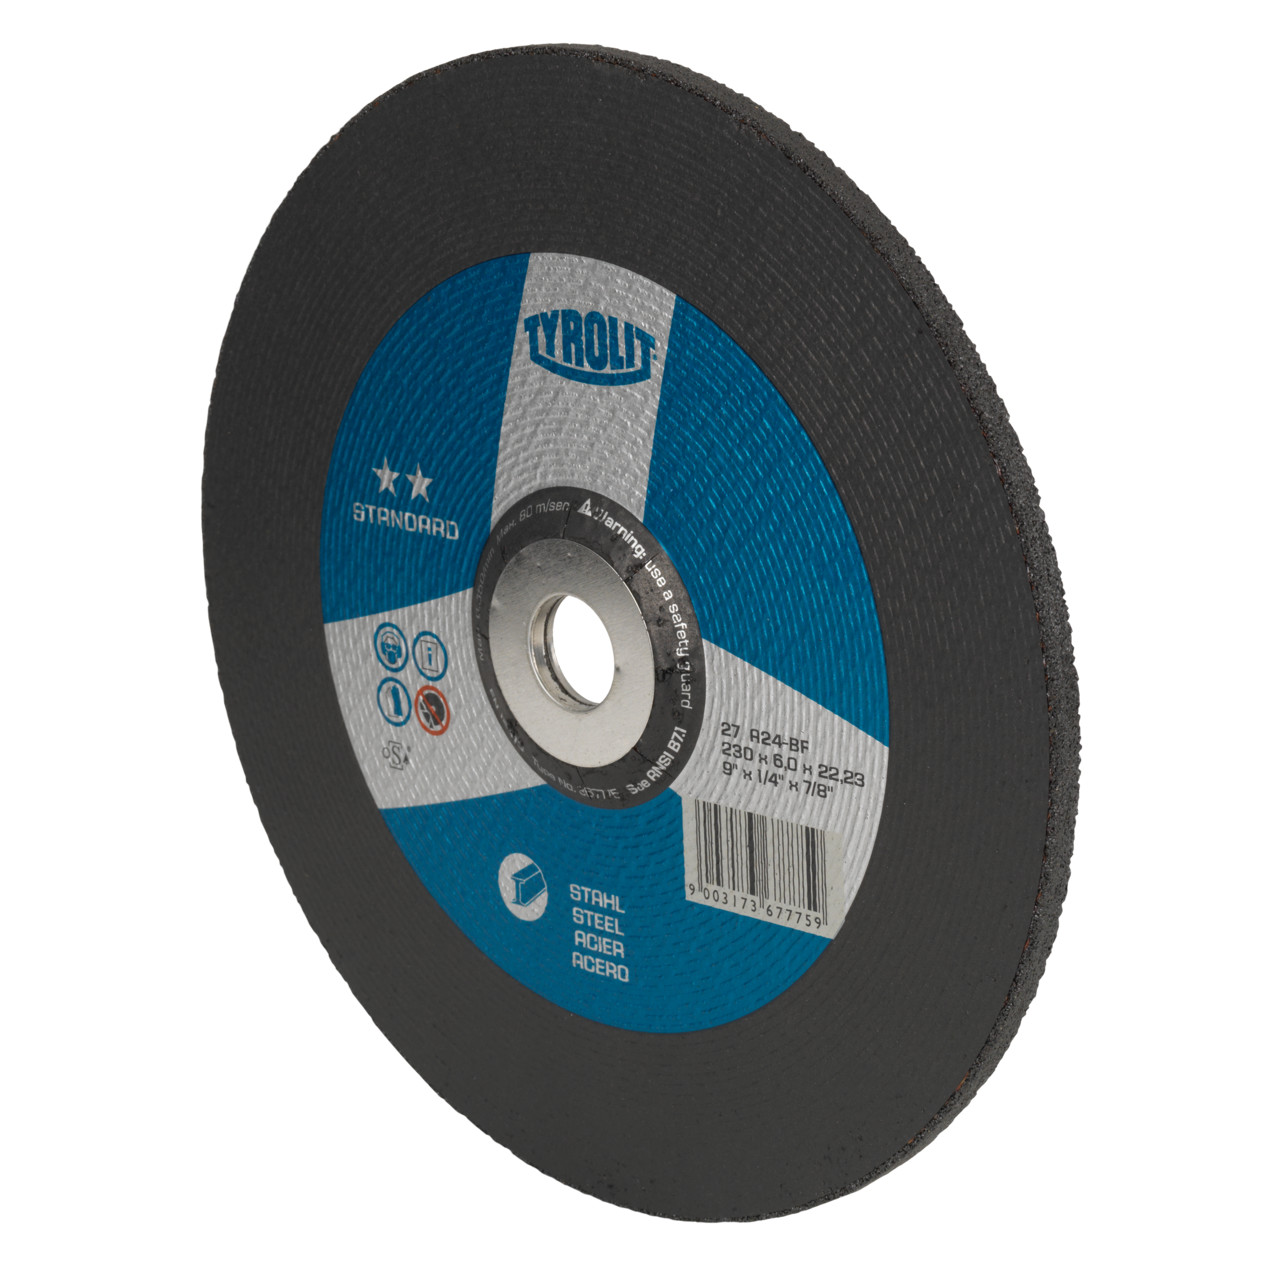 Tyrolit Roughing disc DxUxH 150x6x22.23 For steel, shape: 27 - offset version, Art. 367772